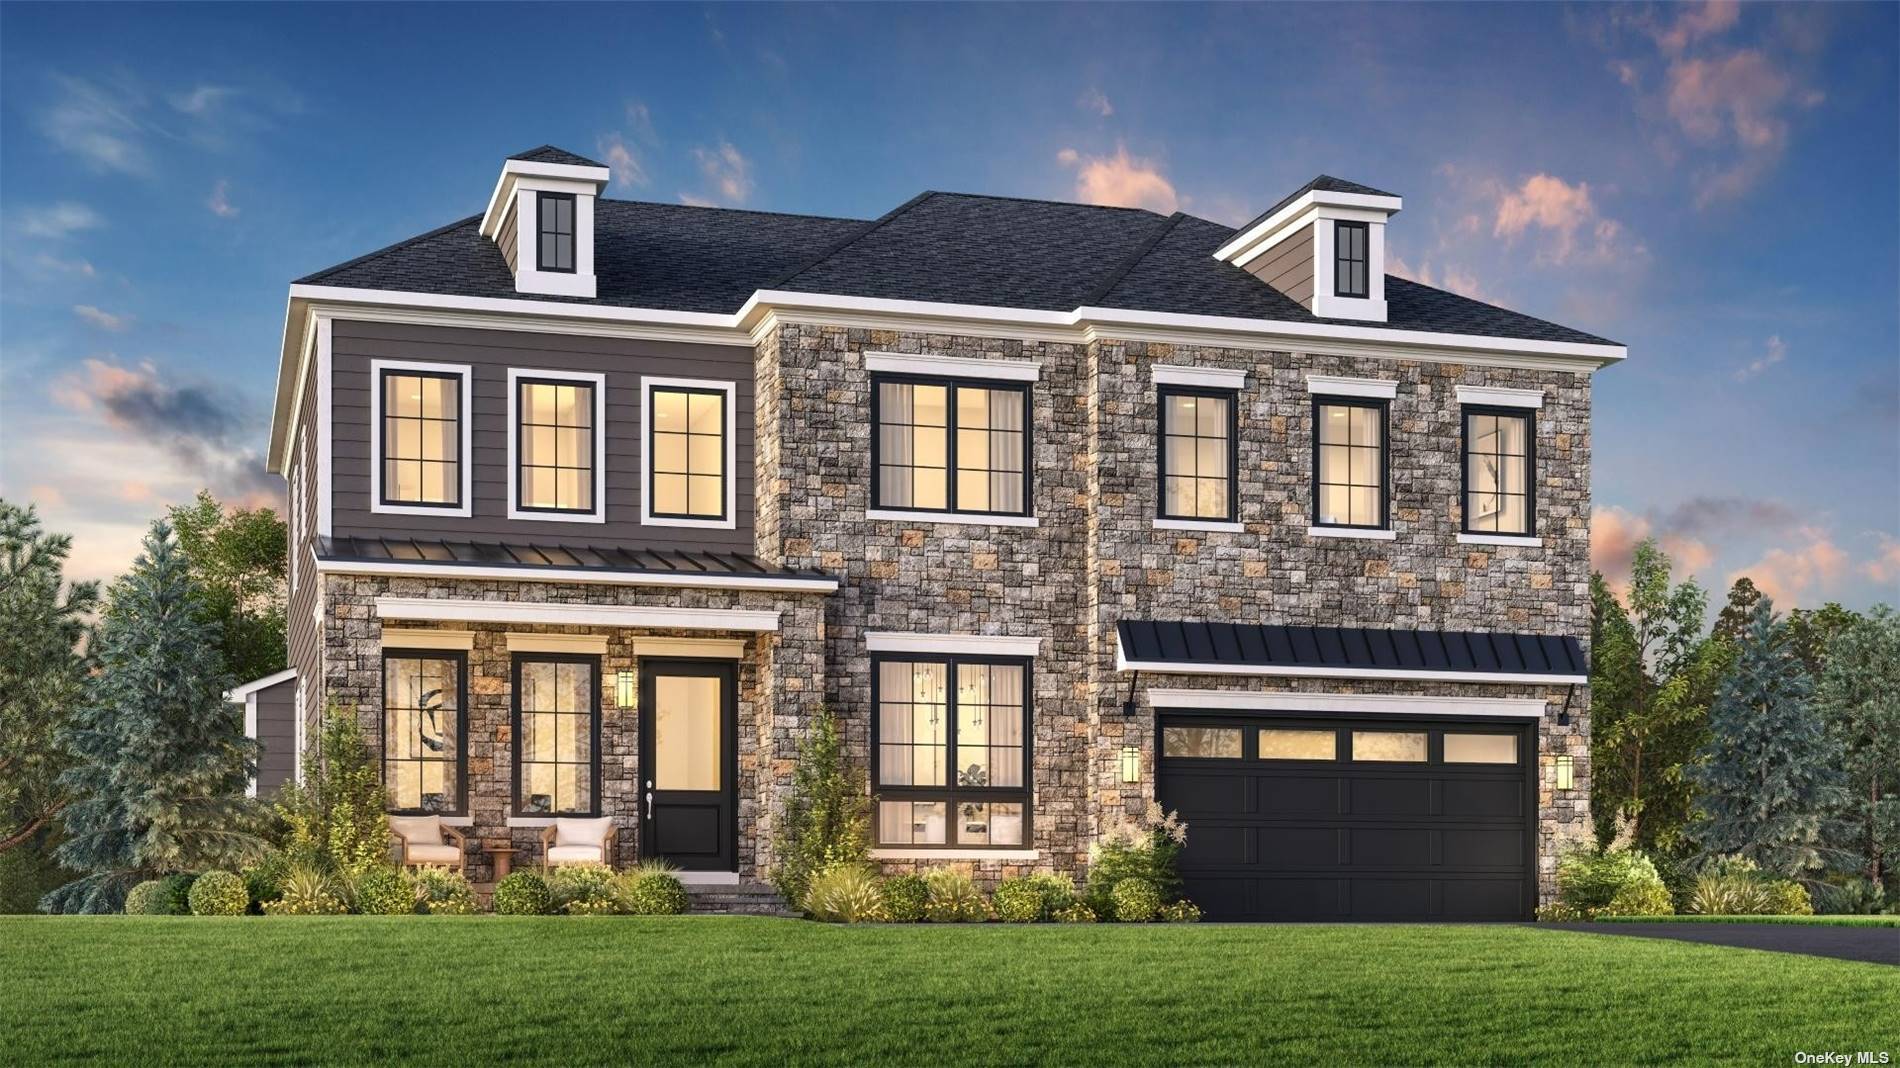 Move in Winter 2025 Manhasset Crest is a new single family home community on Long Island's North Shore.